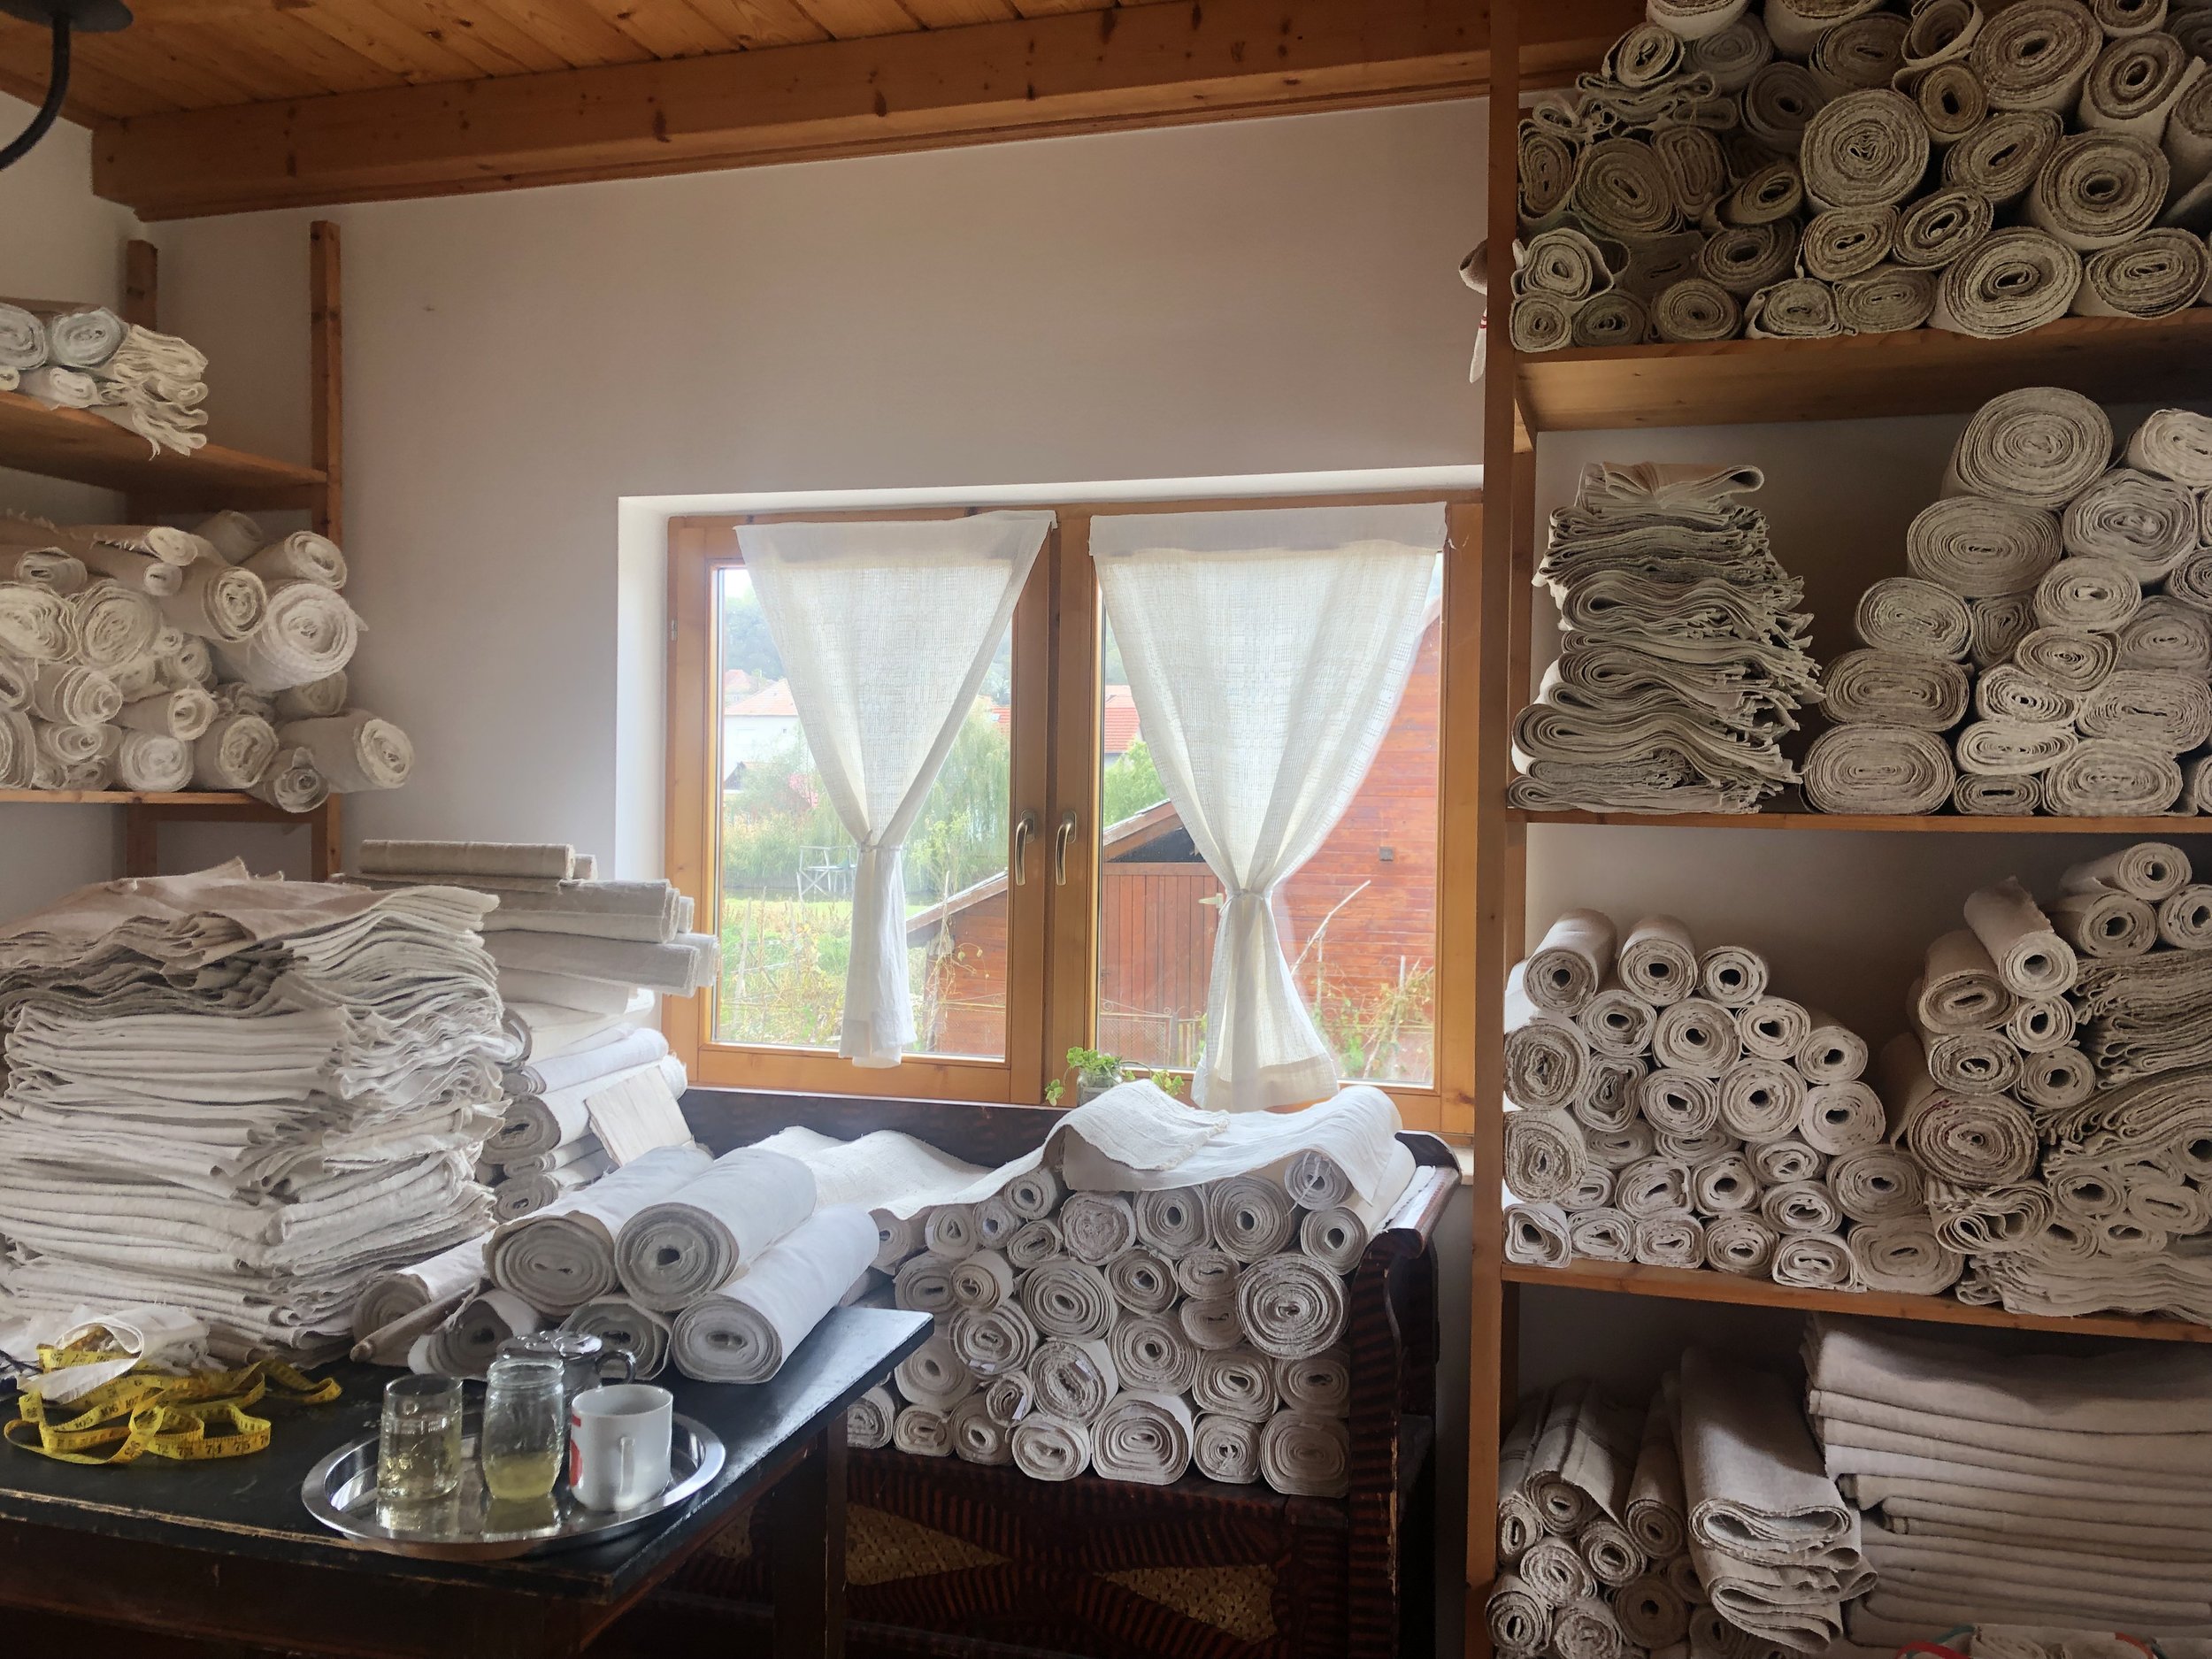  Zsuzsi and Cara run a business exporting textiles! These are handmade rolls of fabric that were woven decades ago.  